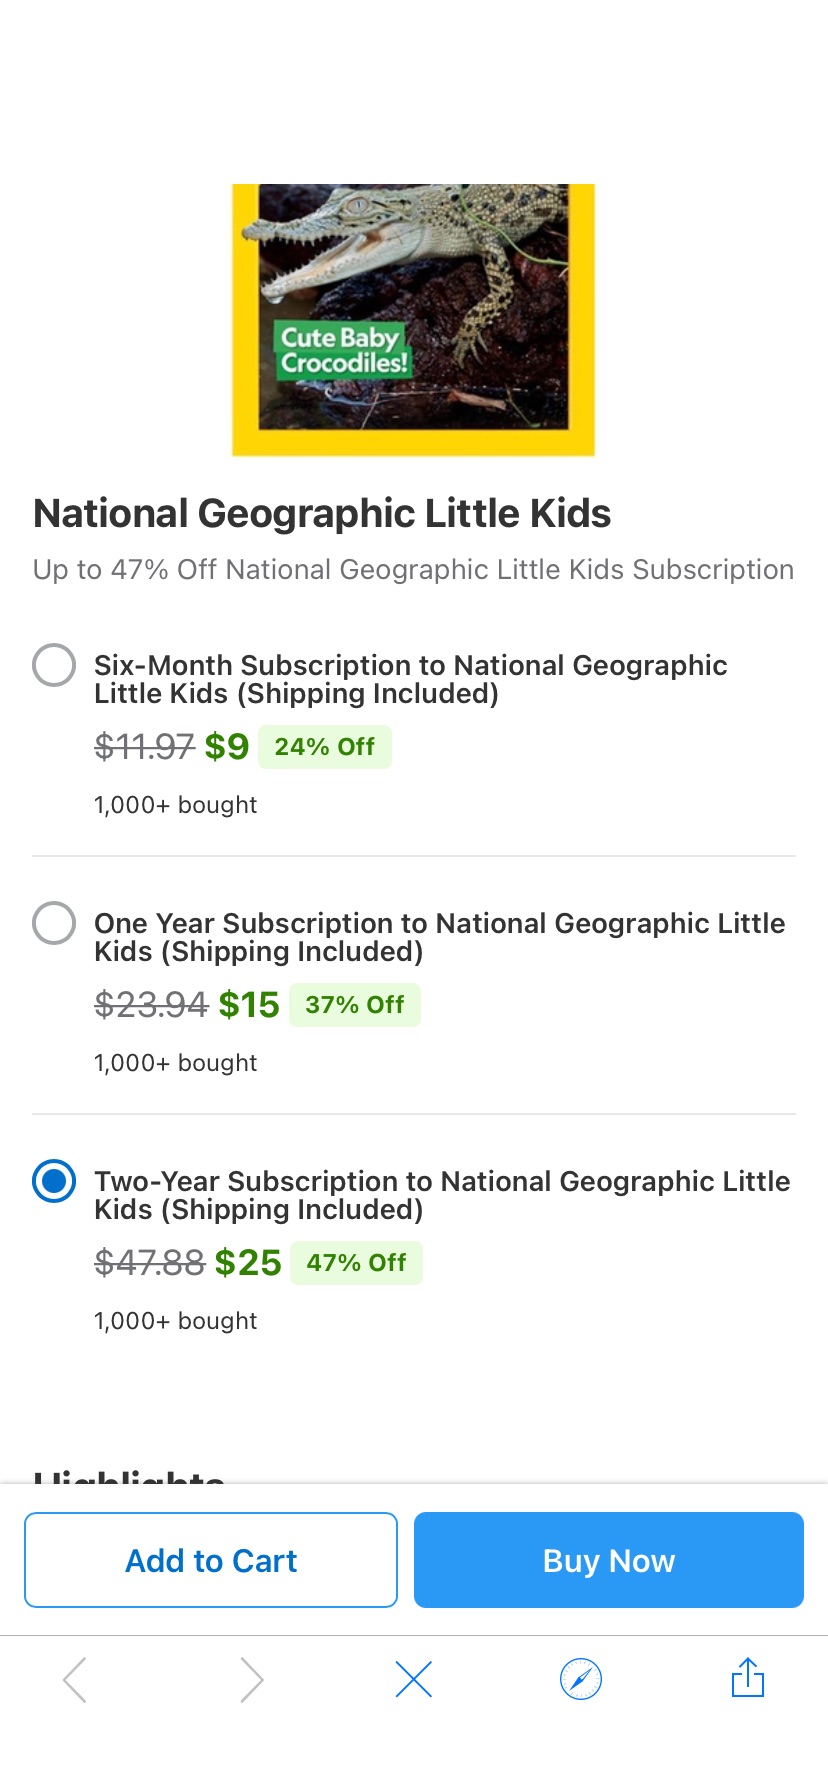 National Geographic Little Kids 两年$25